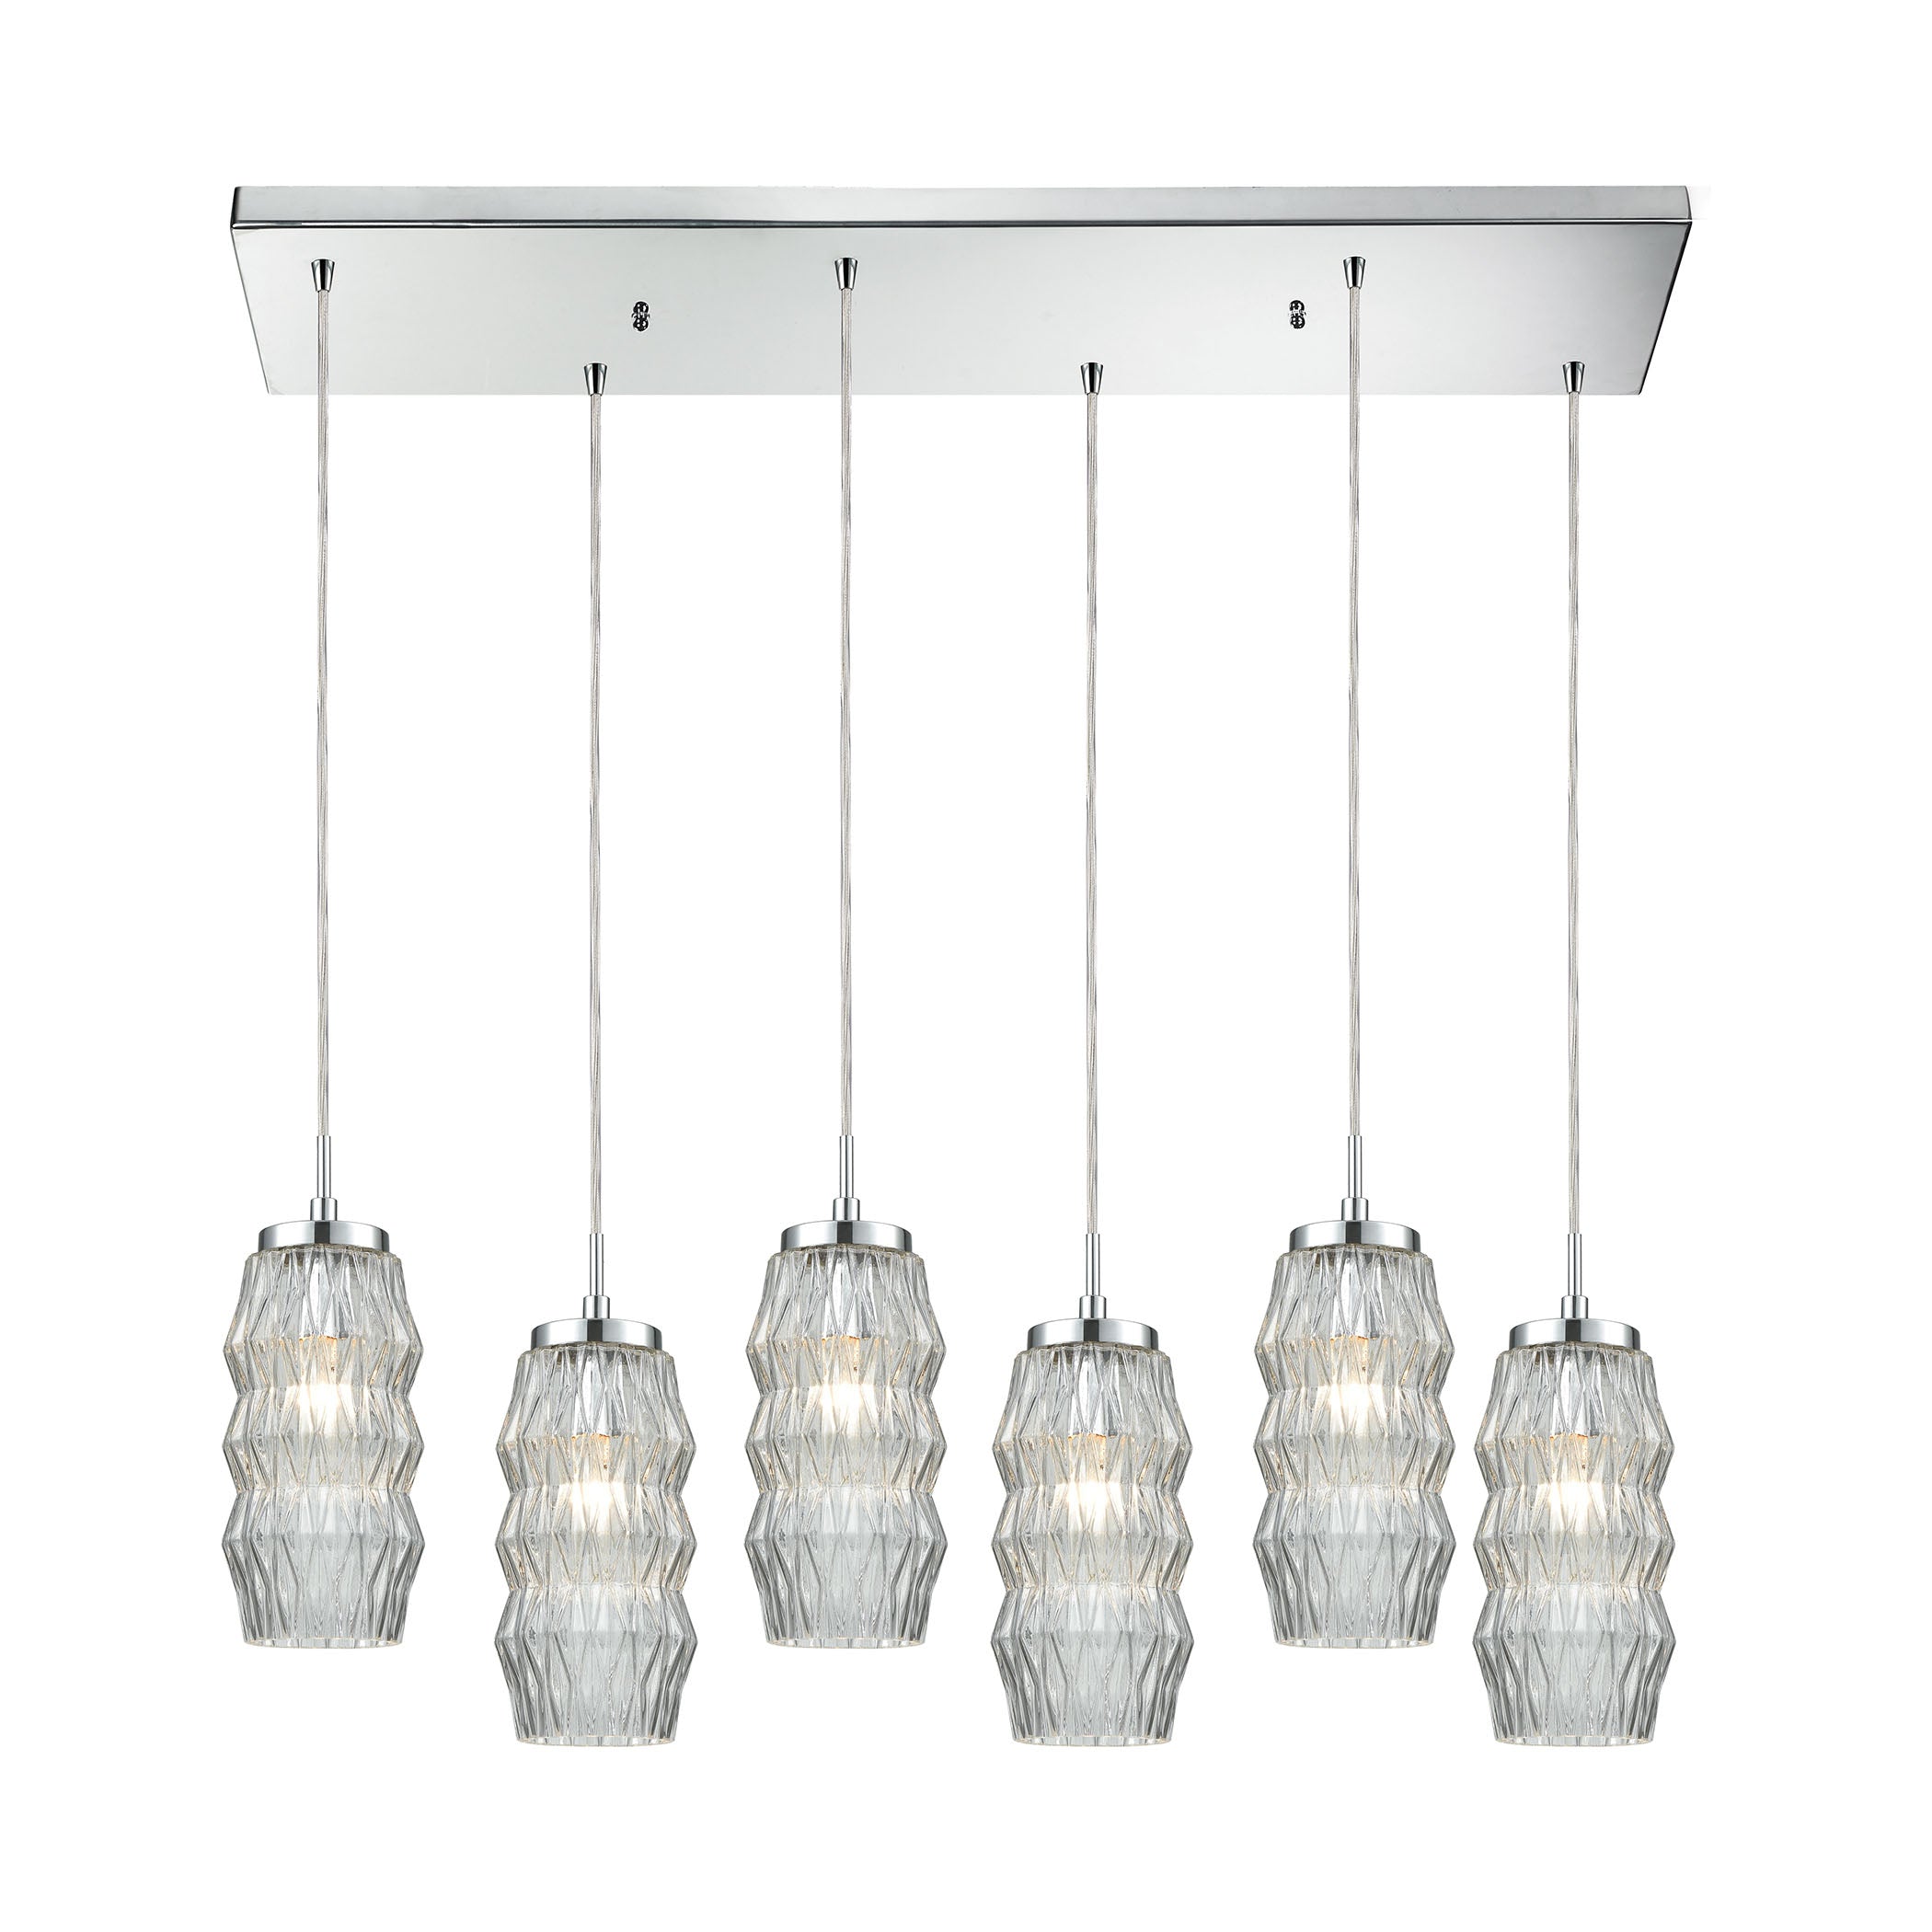 ELK Lighting 56650/6RC Zigzag 6-Light Rectangular Pendant Fixture in Polished Chrome with Clear Patterned Glass